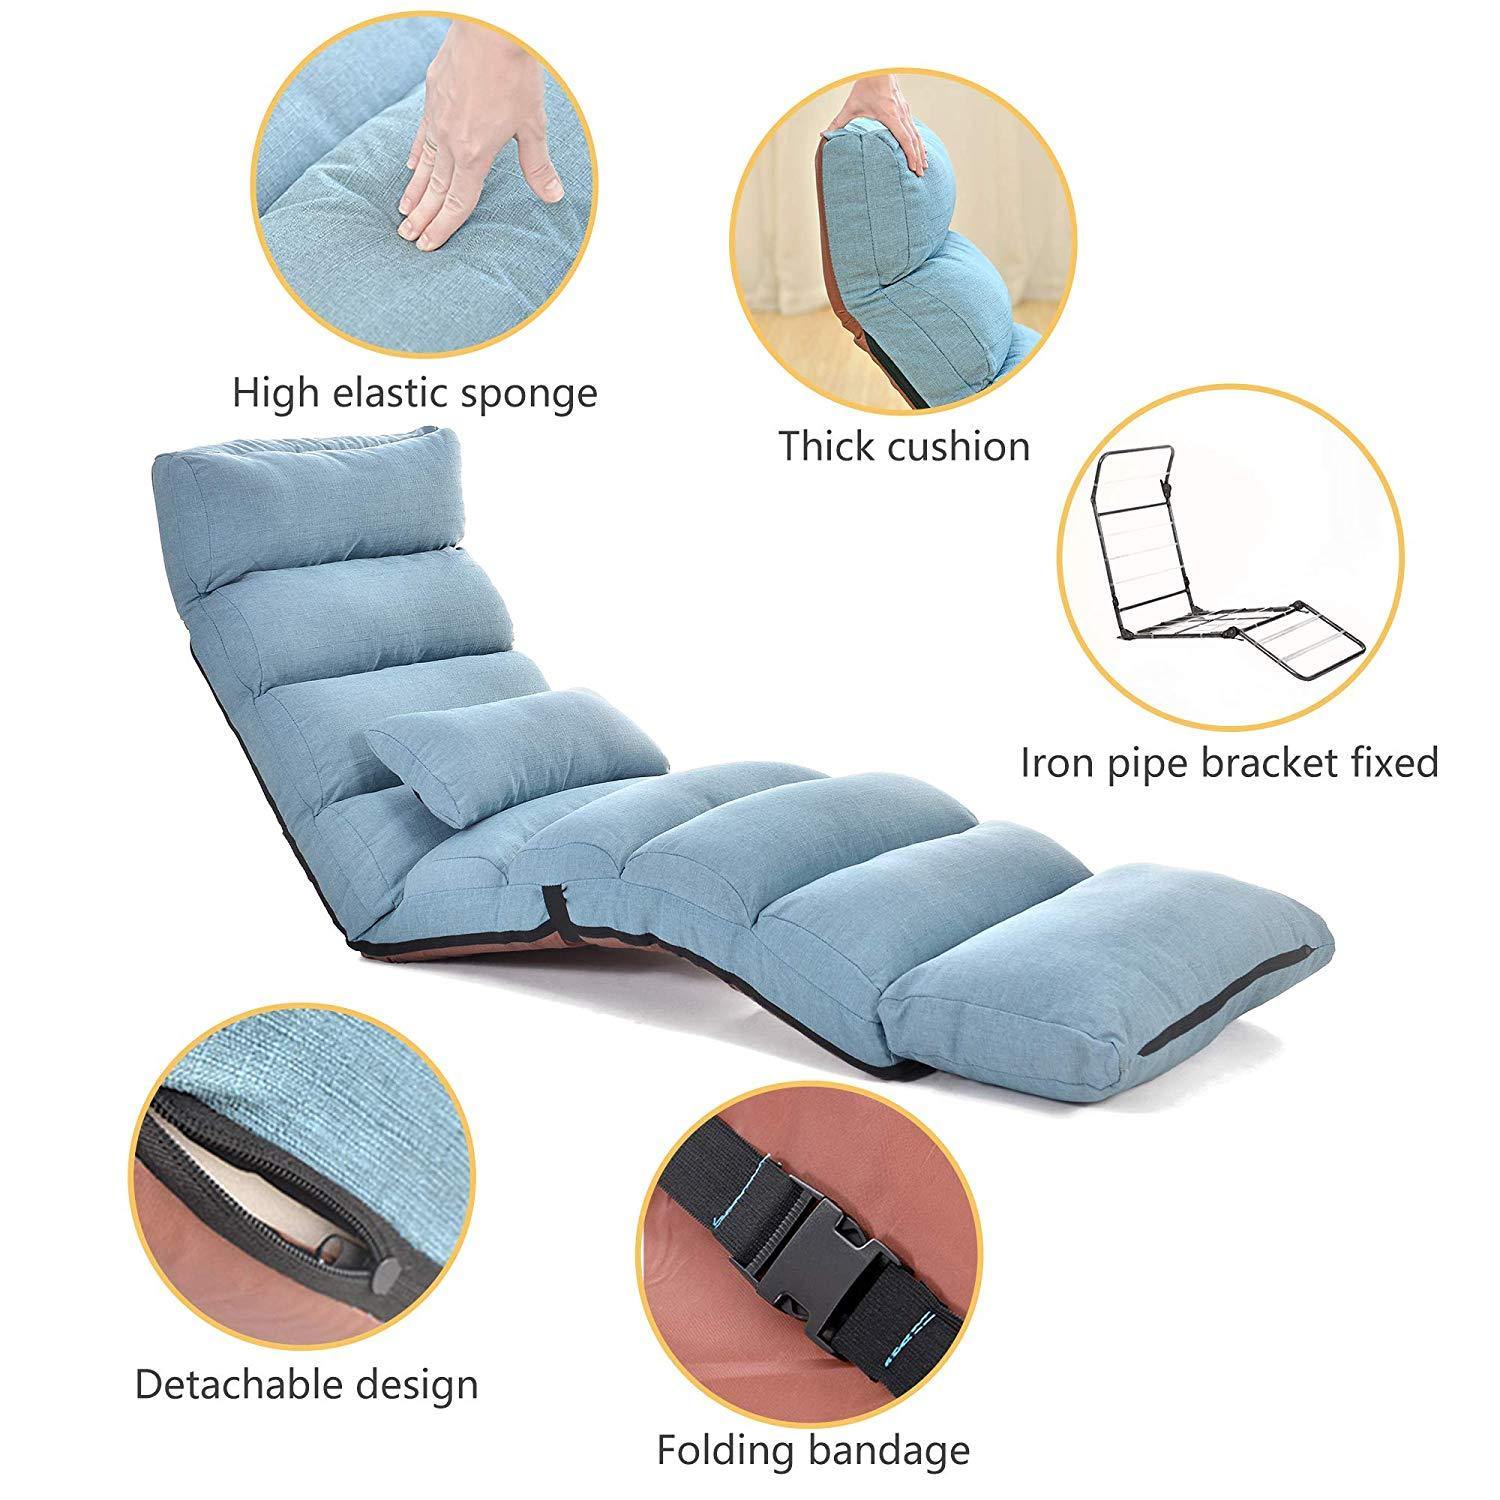 Large Floor Chair for Adults Sofa Recliner Chairs Head Back Foot Adjustable, Living Room Lounger Chair for Gaming, Reading, Meditating, with Pillow - Bosonshop